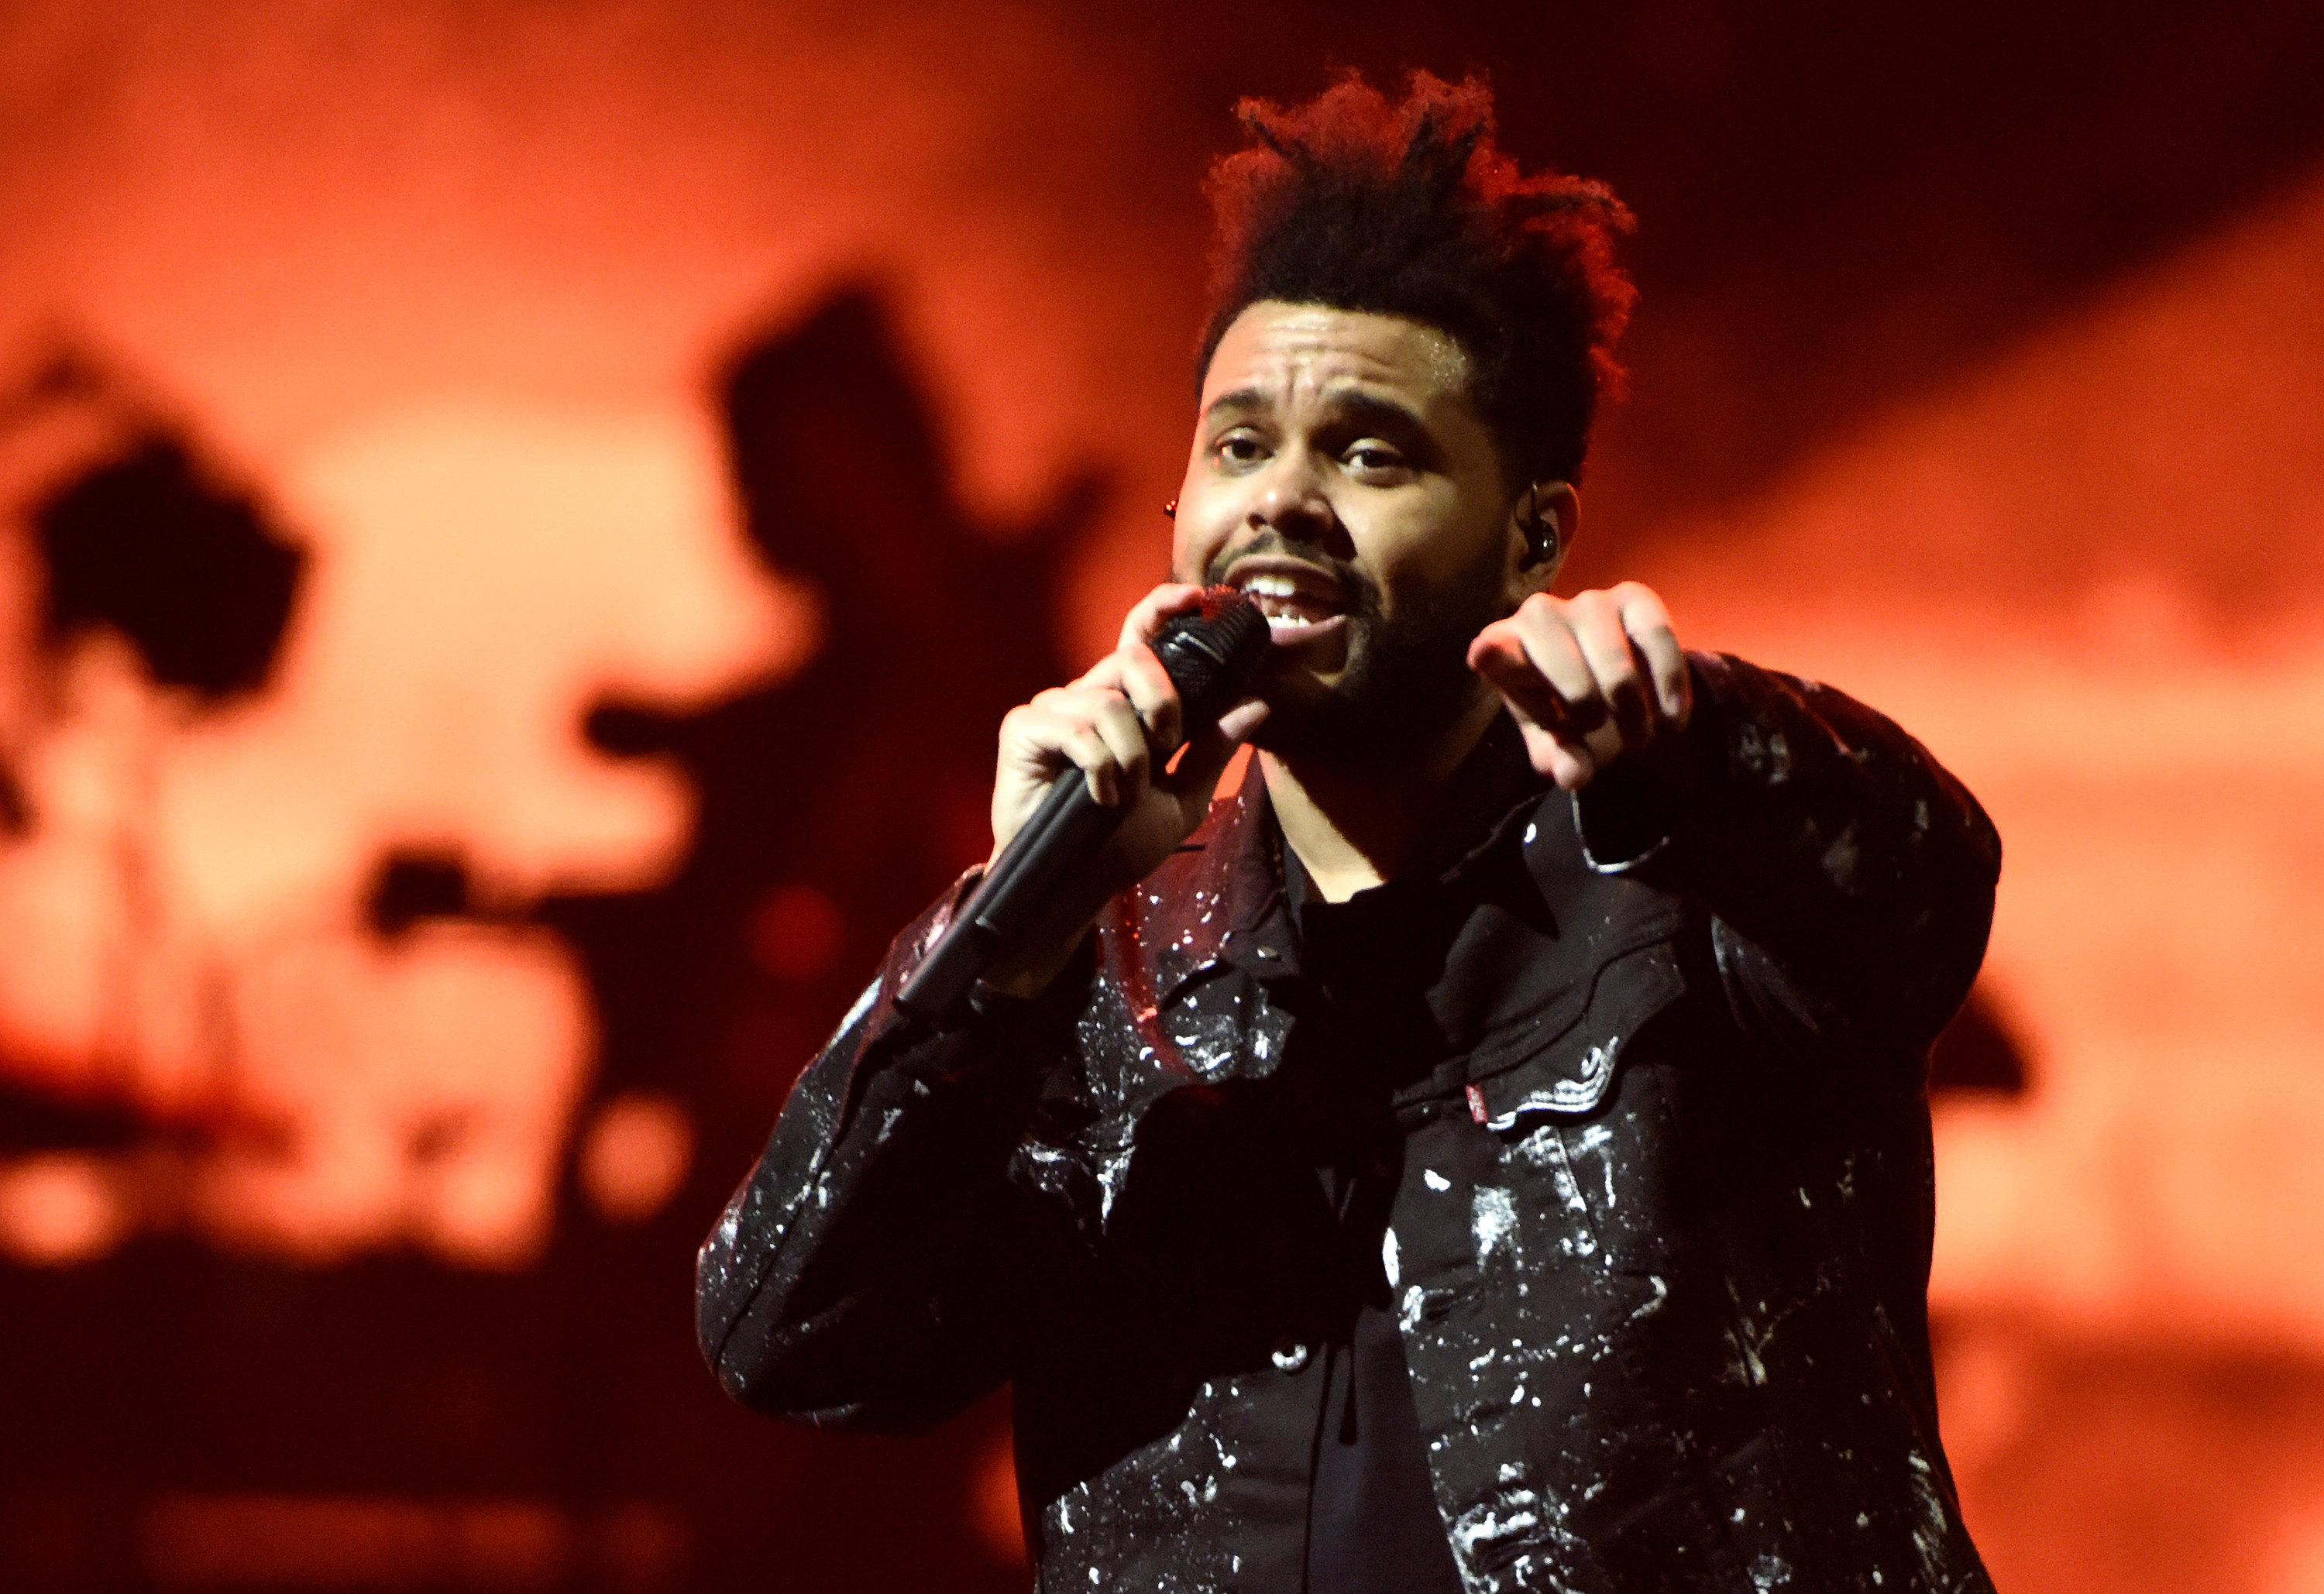 The Weeknd performs during his "Starboy World Tour" at Golden 1 Center on October 11, 2017 in Sacramento, California. (Tim Mosen—Getty Images)